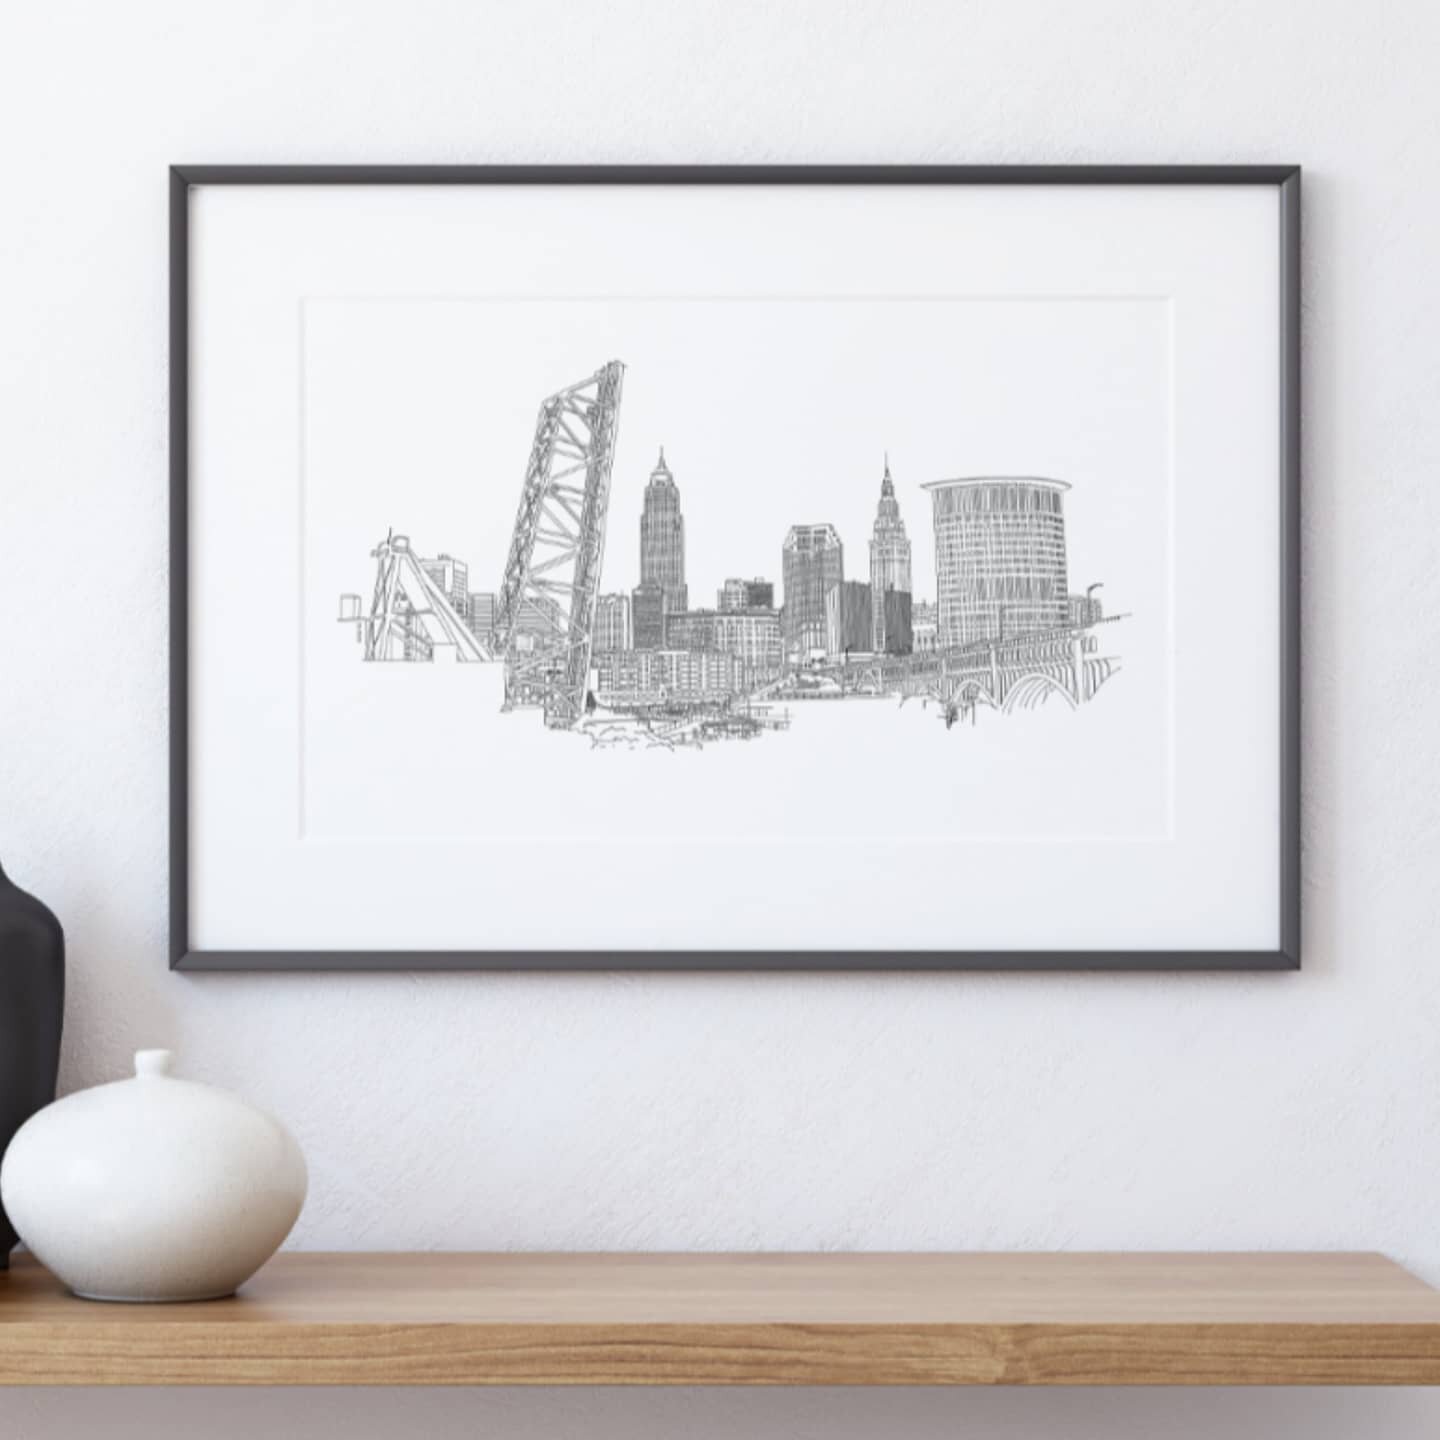 Admire a view from #theflats from the comfort of your home. #Cleveland...this is for you!! For sale in many sizes in my shop. 🌉
.
.
#216  #illustration #skyline #art #artoftheday #architecture #linedrawing #etsy #bridge #forsale #midwestisbest #gift